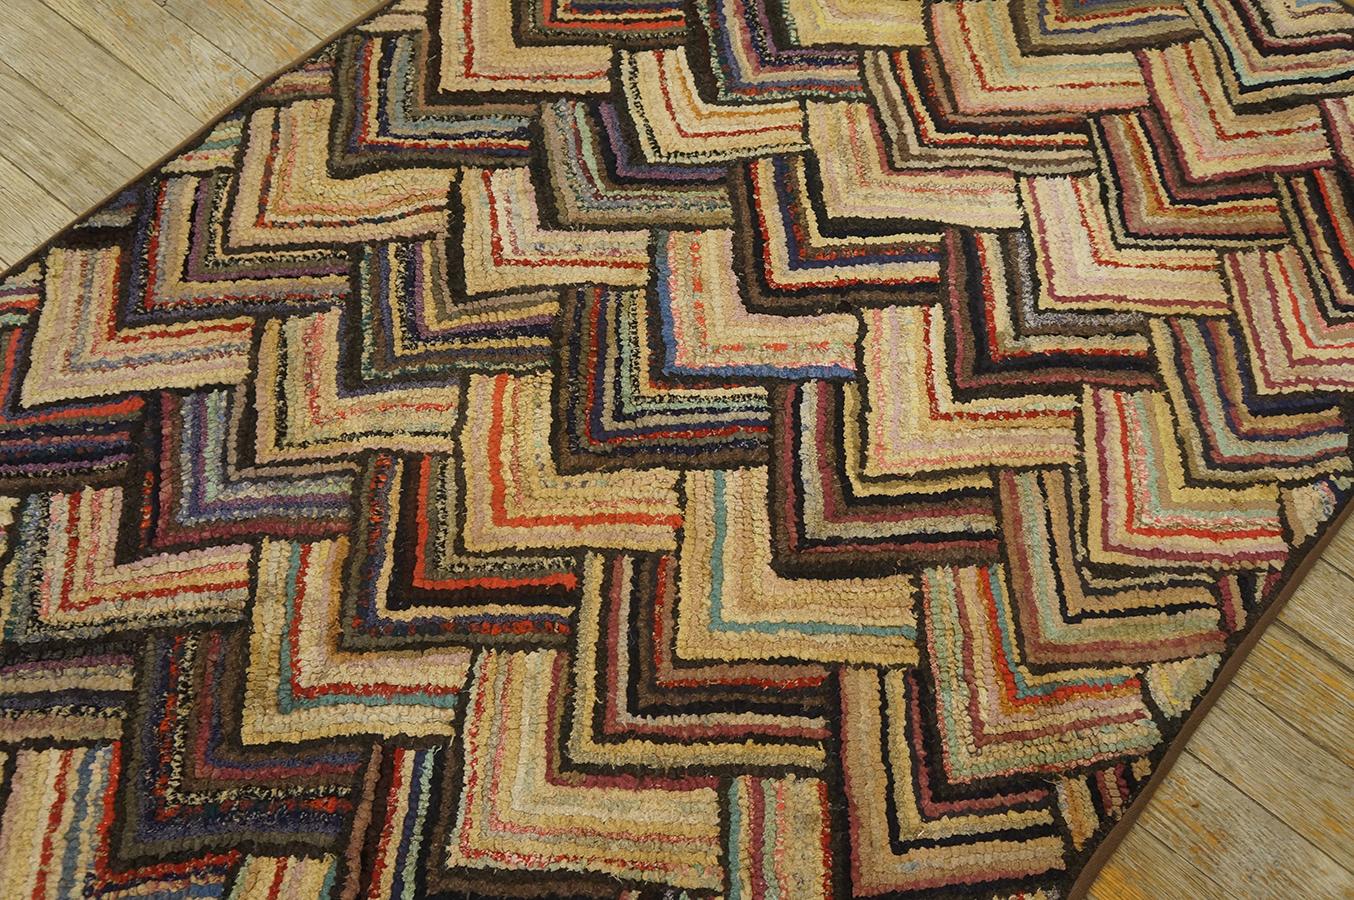 Early 20th Century American Hooked Rug ( 2' 7'' x 4' 6'' - 78 x 137 cm ) For Sale 8